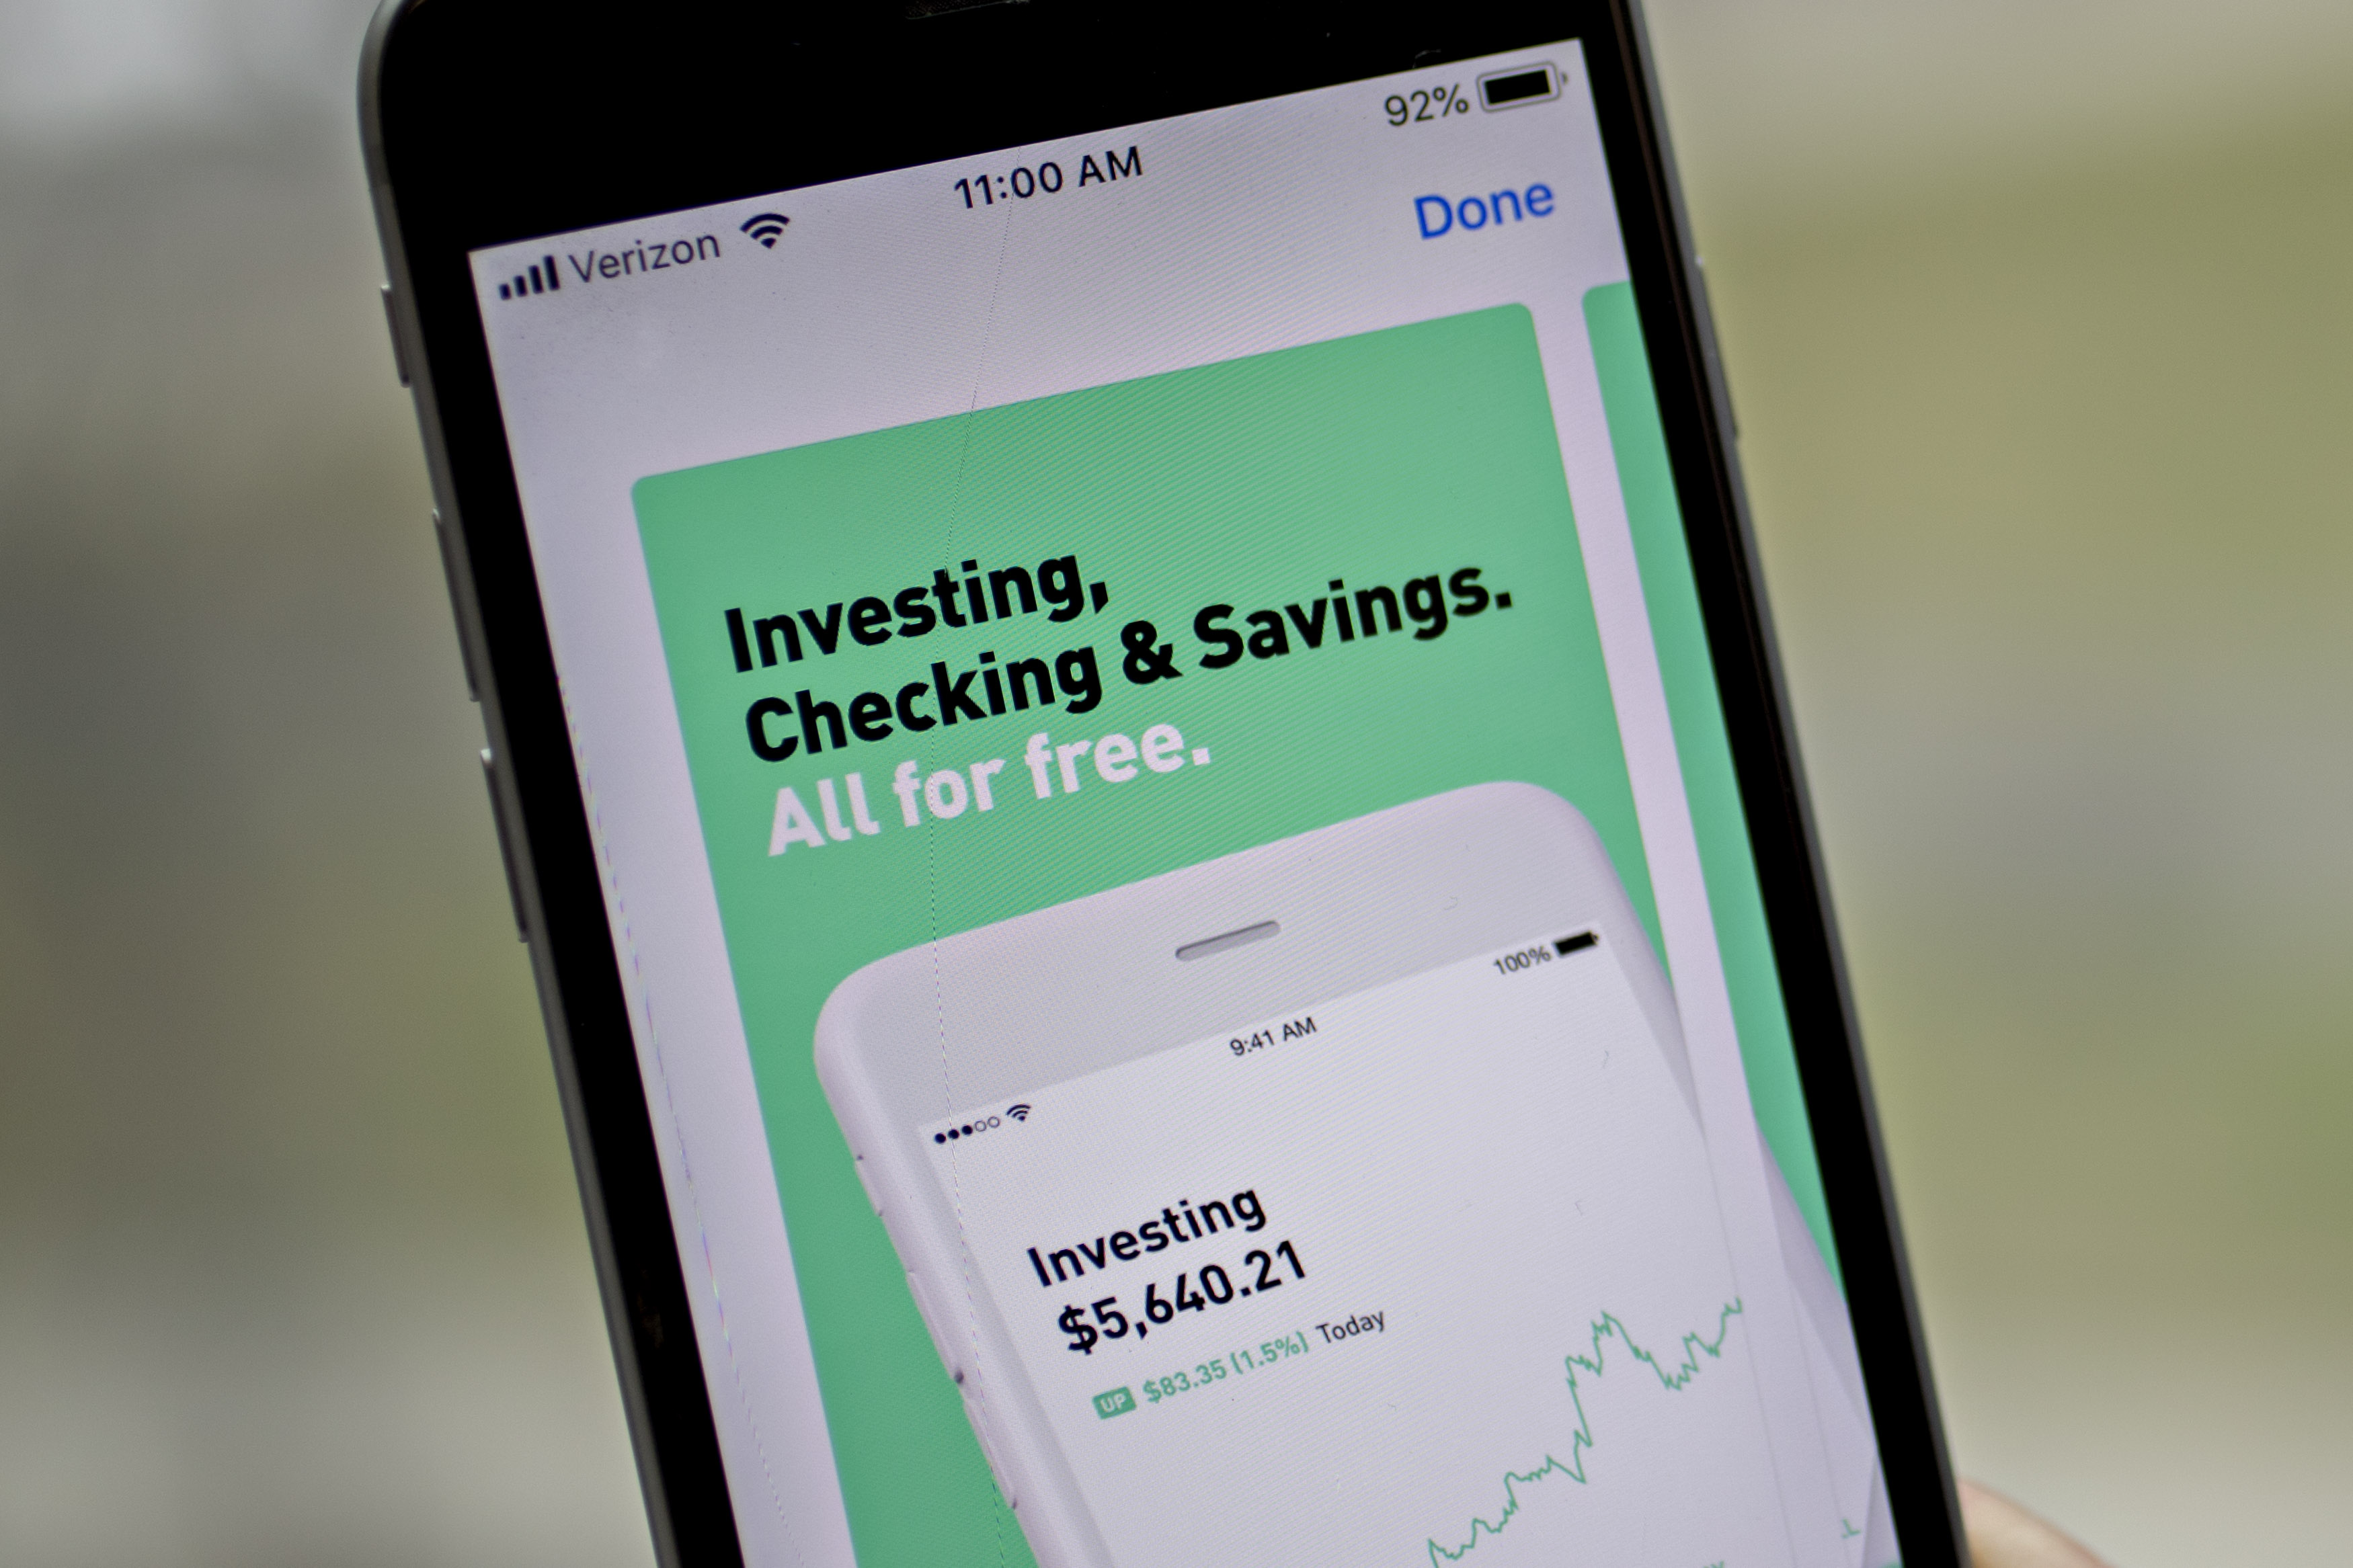 Investing App Robinhood Is Facing 'Serious Concerns' Over Its New Checking Account With 3% Interest